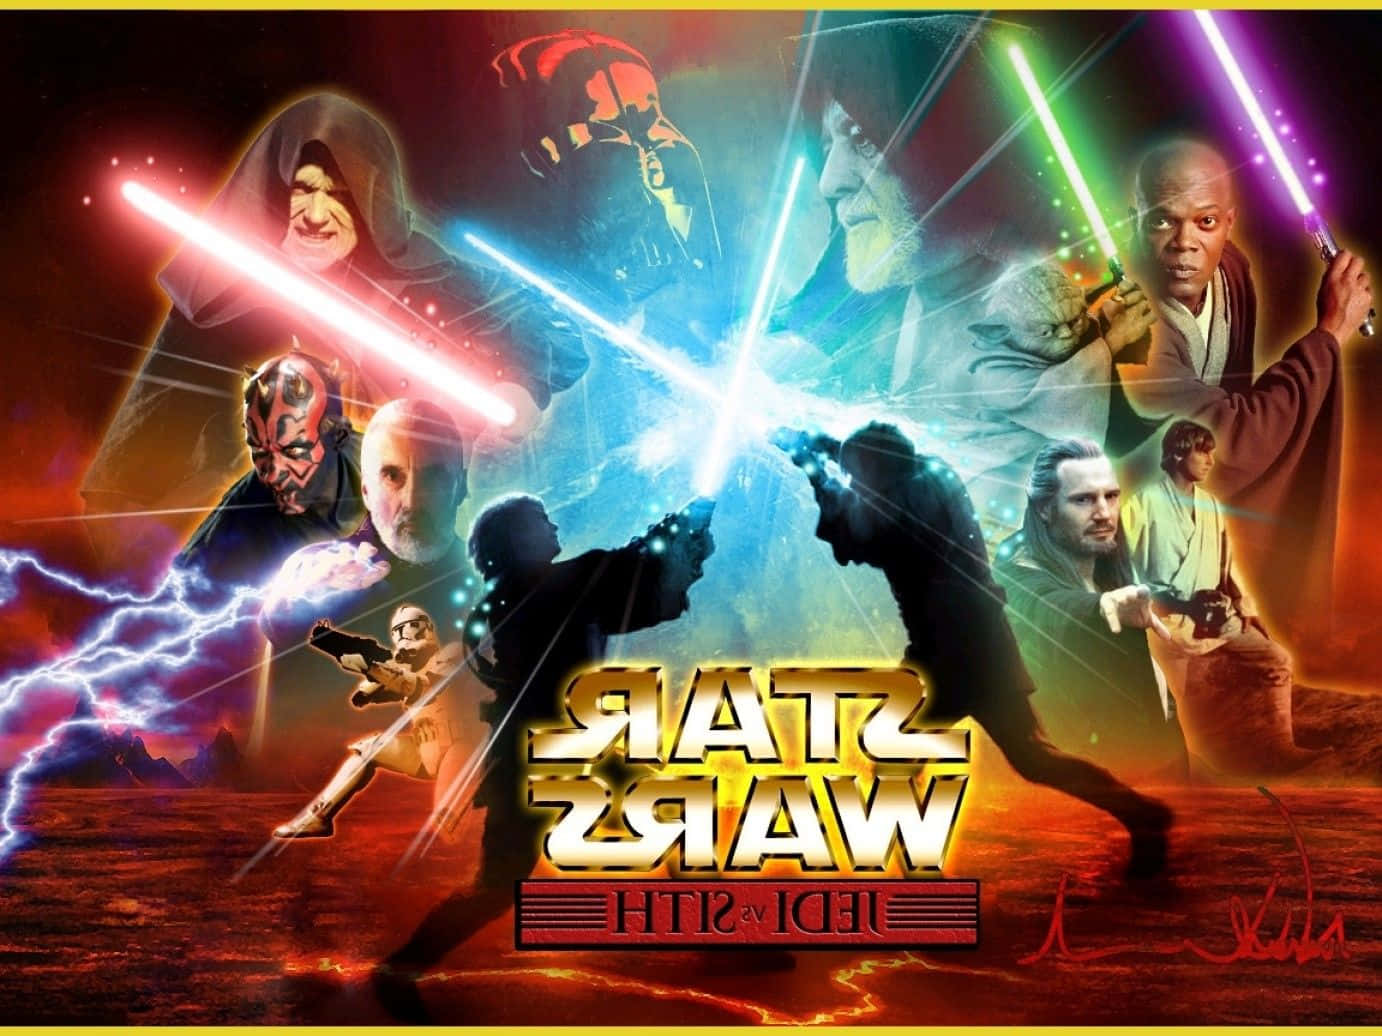 Epic Showdown Between Jedi And Sith In The Star Wars Universe Wallpaper